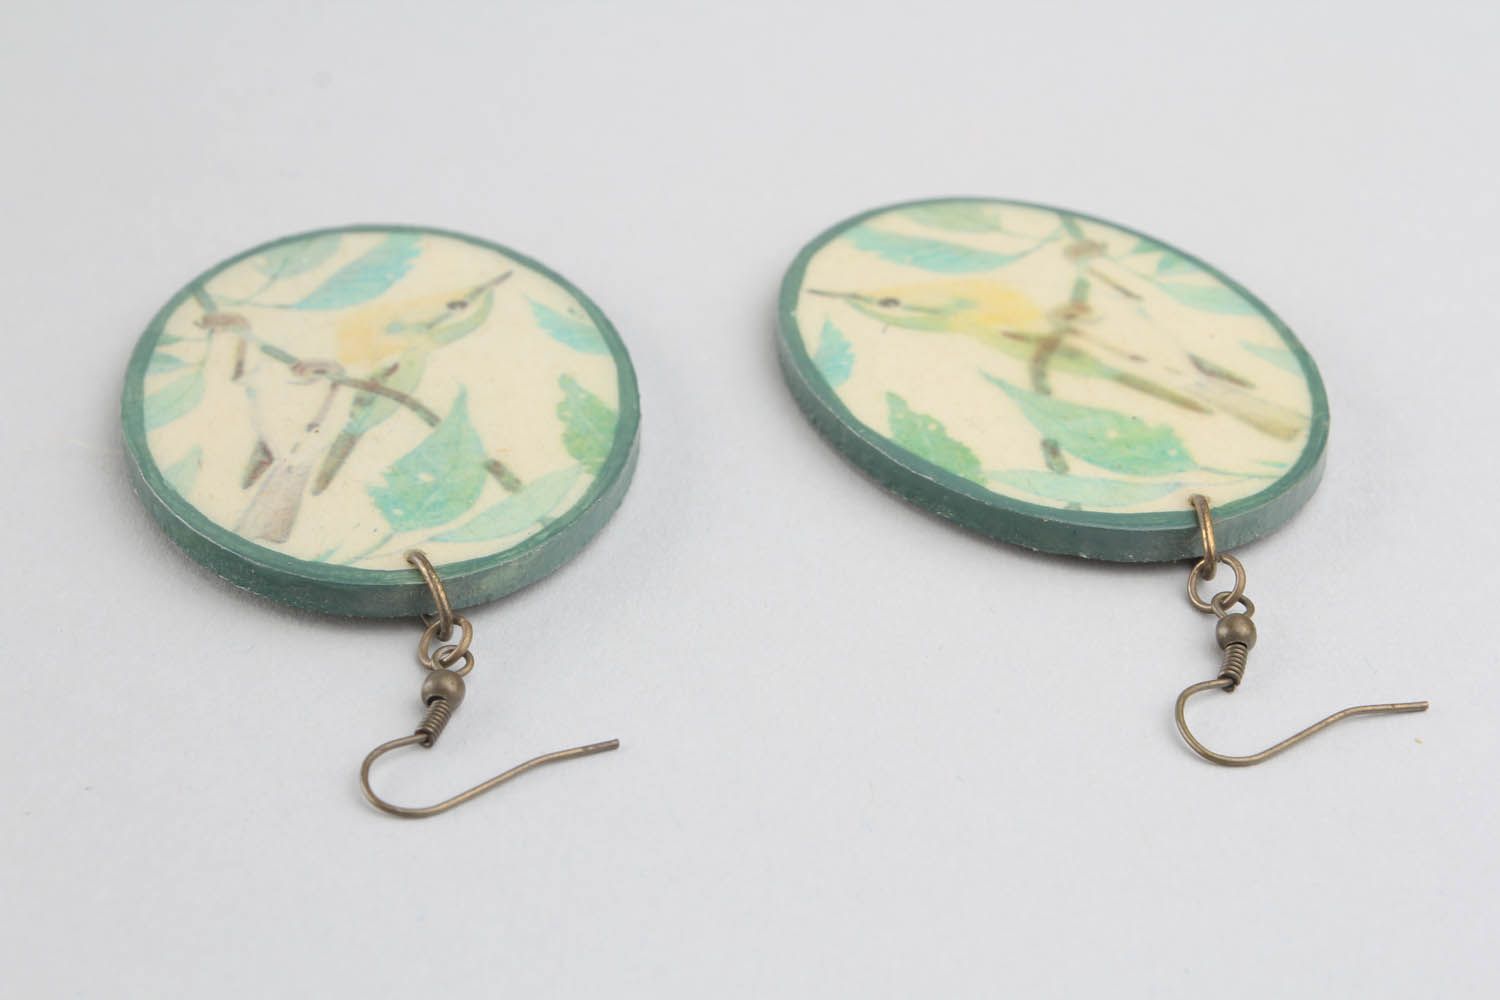 Earrings made using decoupage technique photo 2